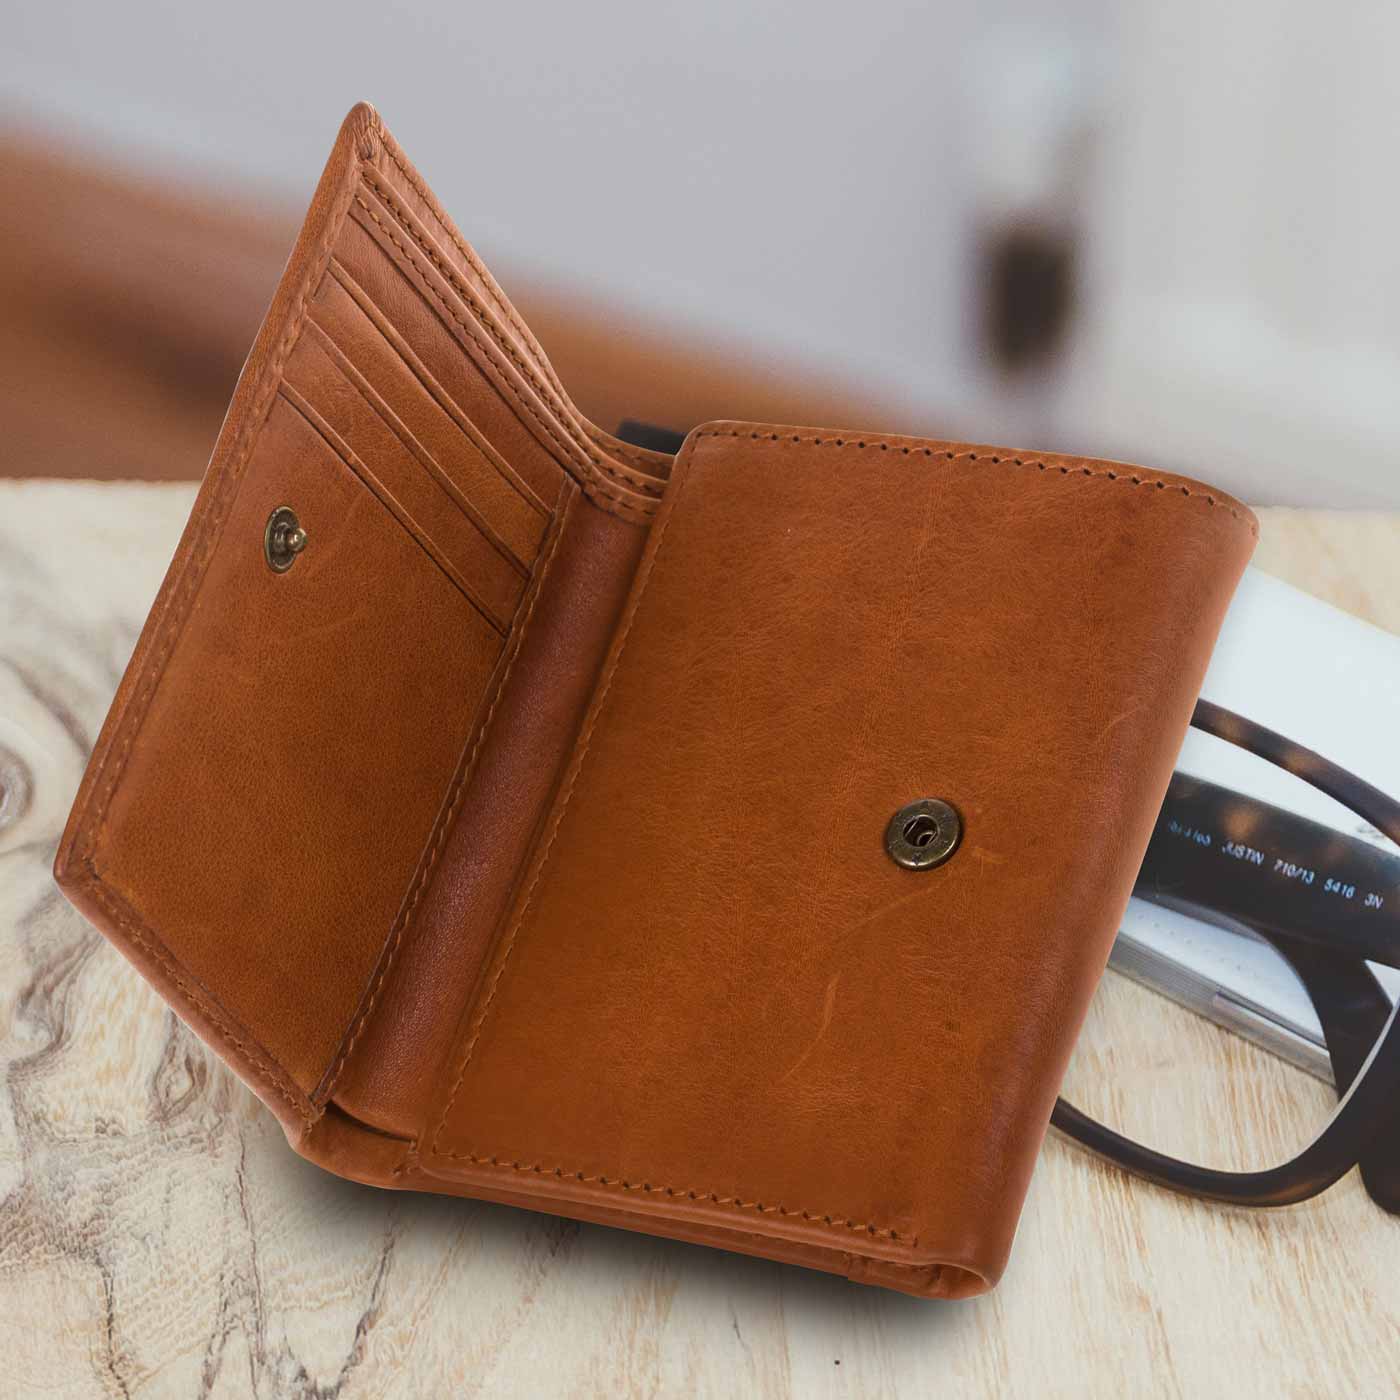 Premium Leather Wallet Repair. If your branded wallet doesn't look…, by  Deleathercrafts